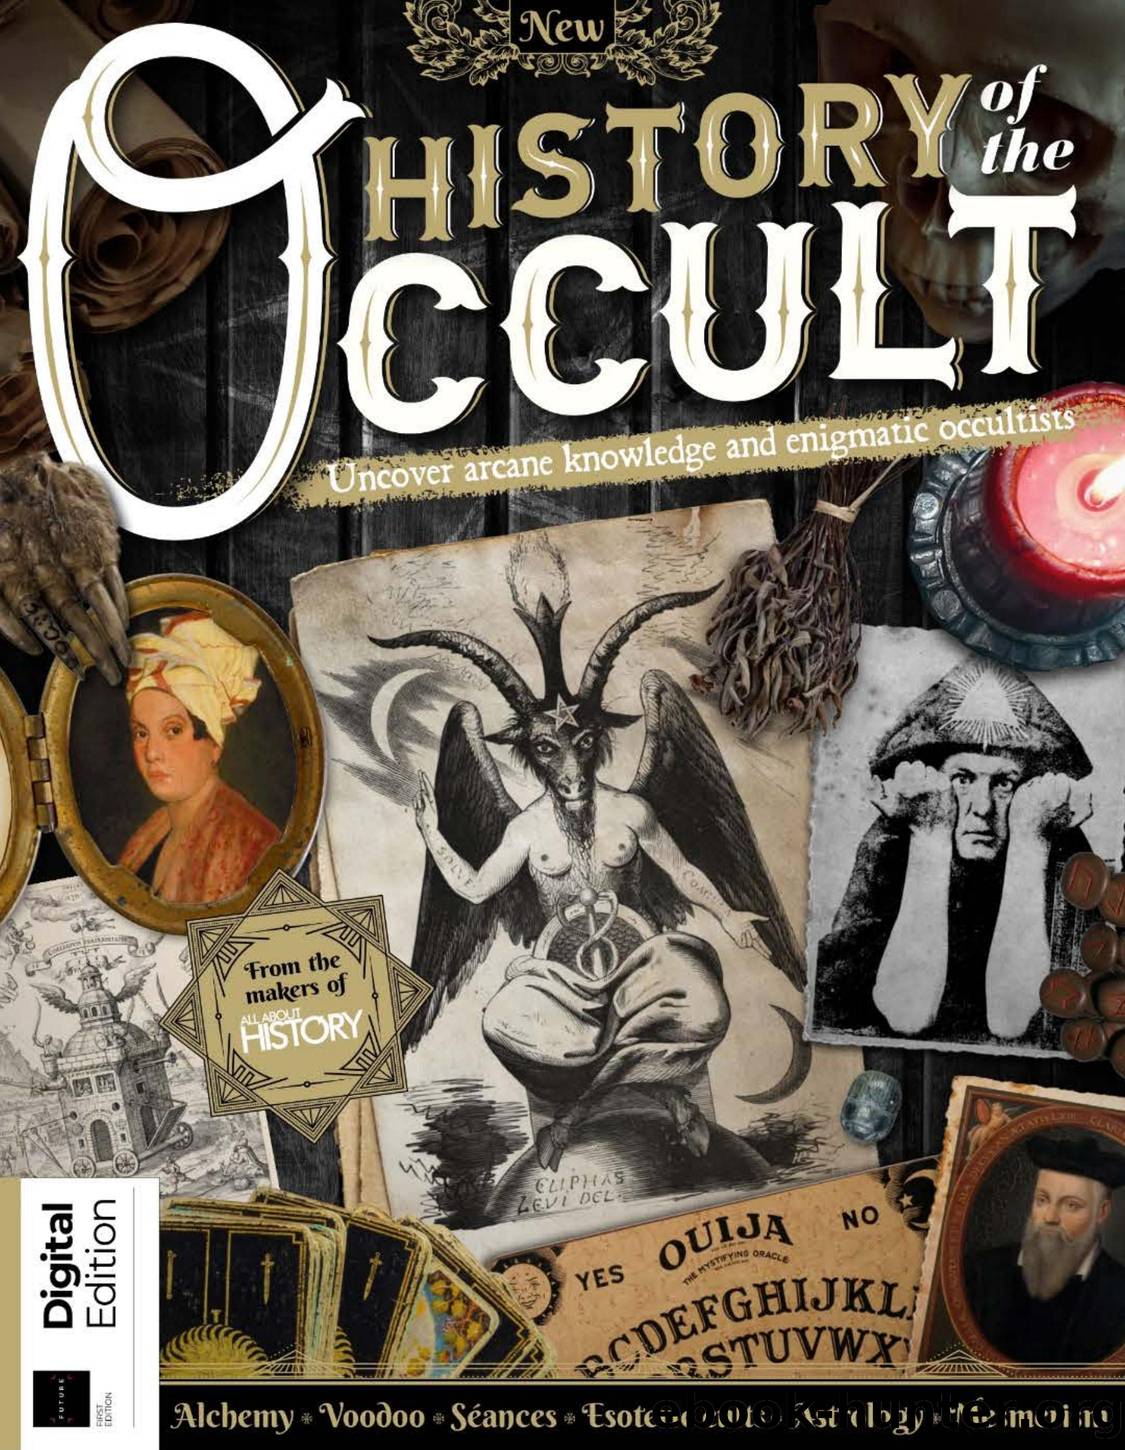 All About History by History of the Occult